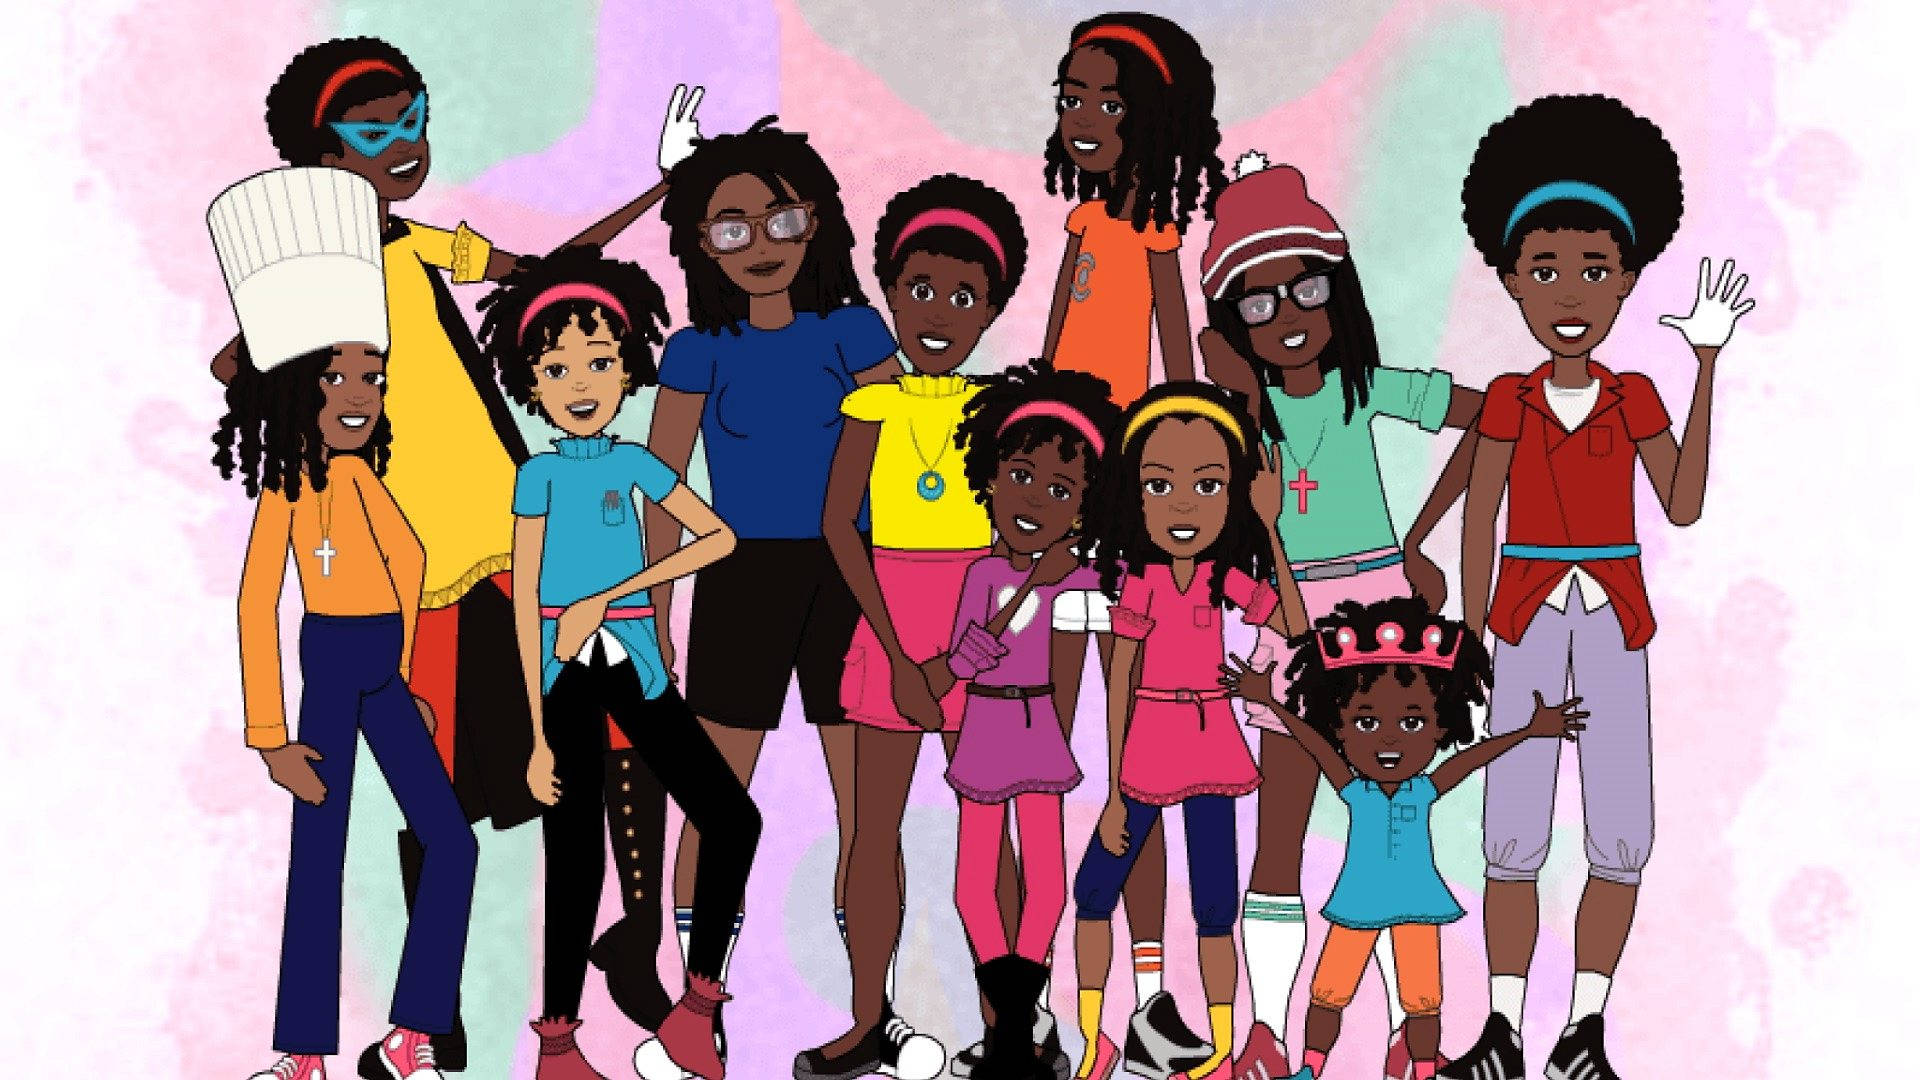 A Cartoon Illustration Of A Group Of Black Children